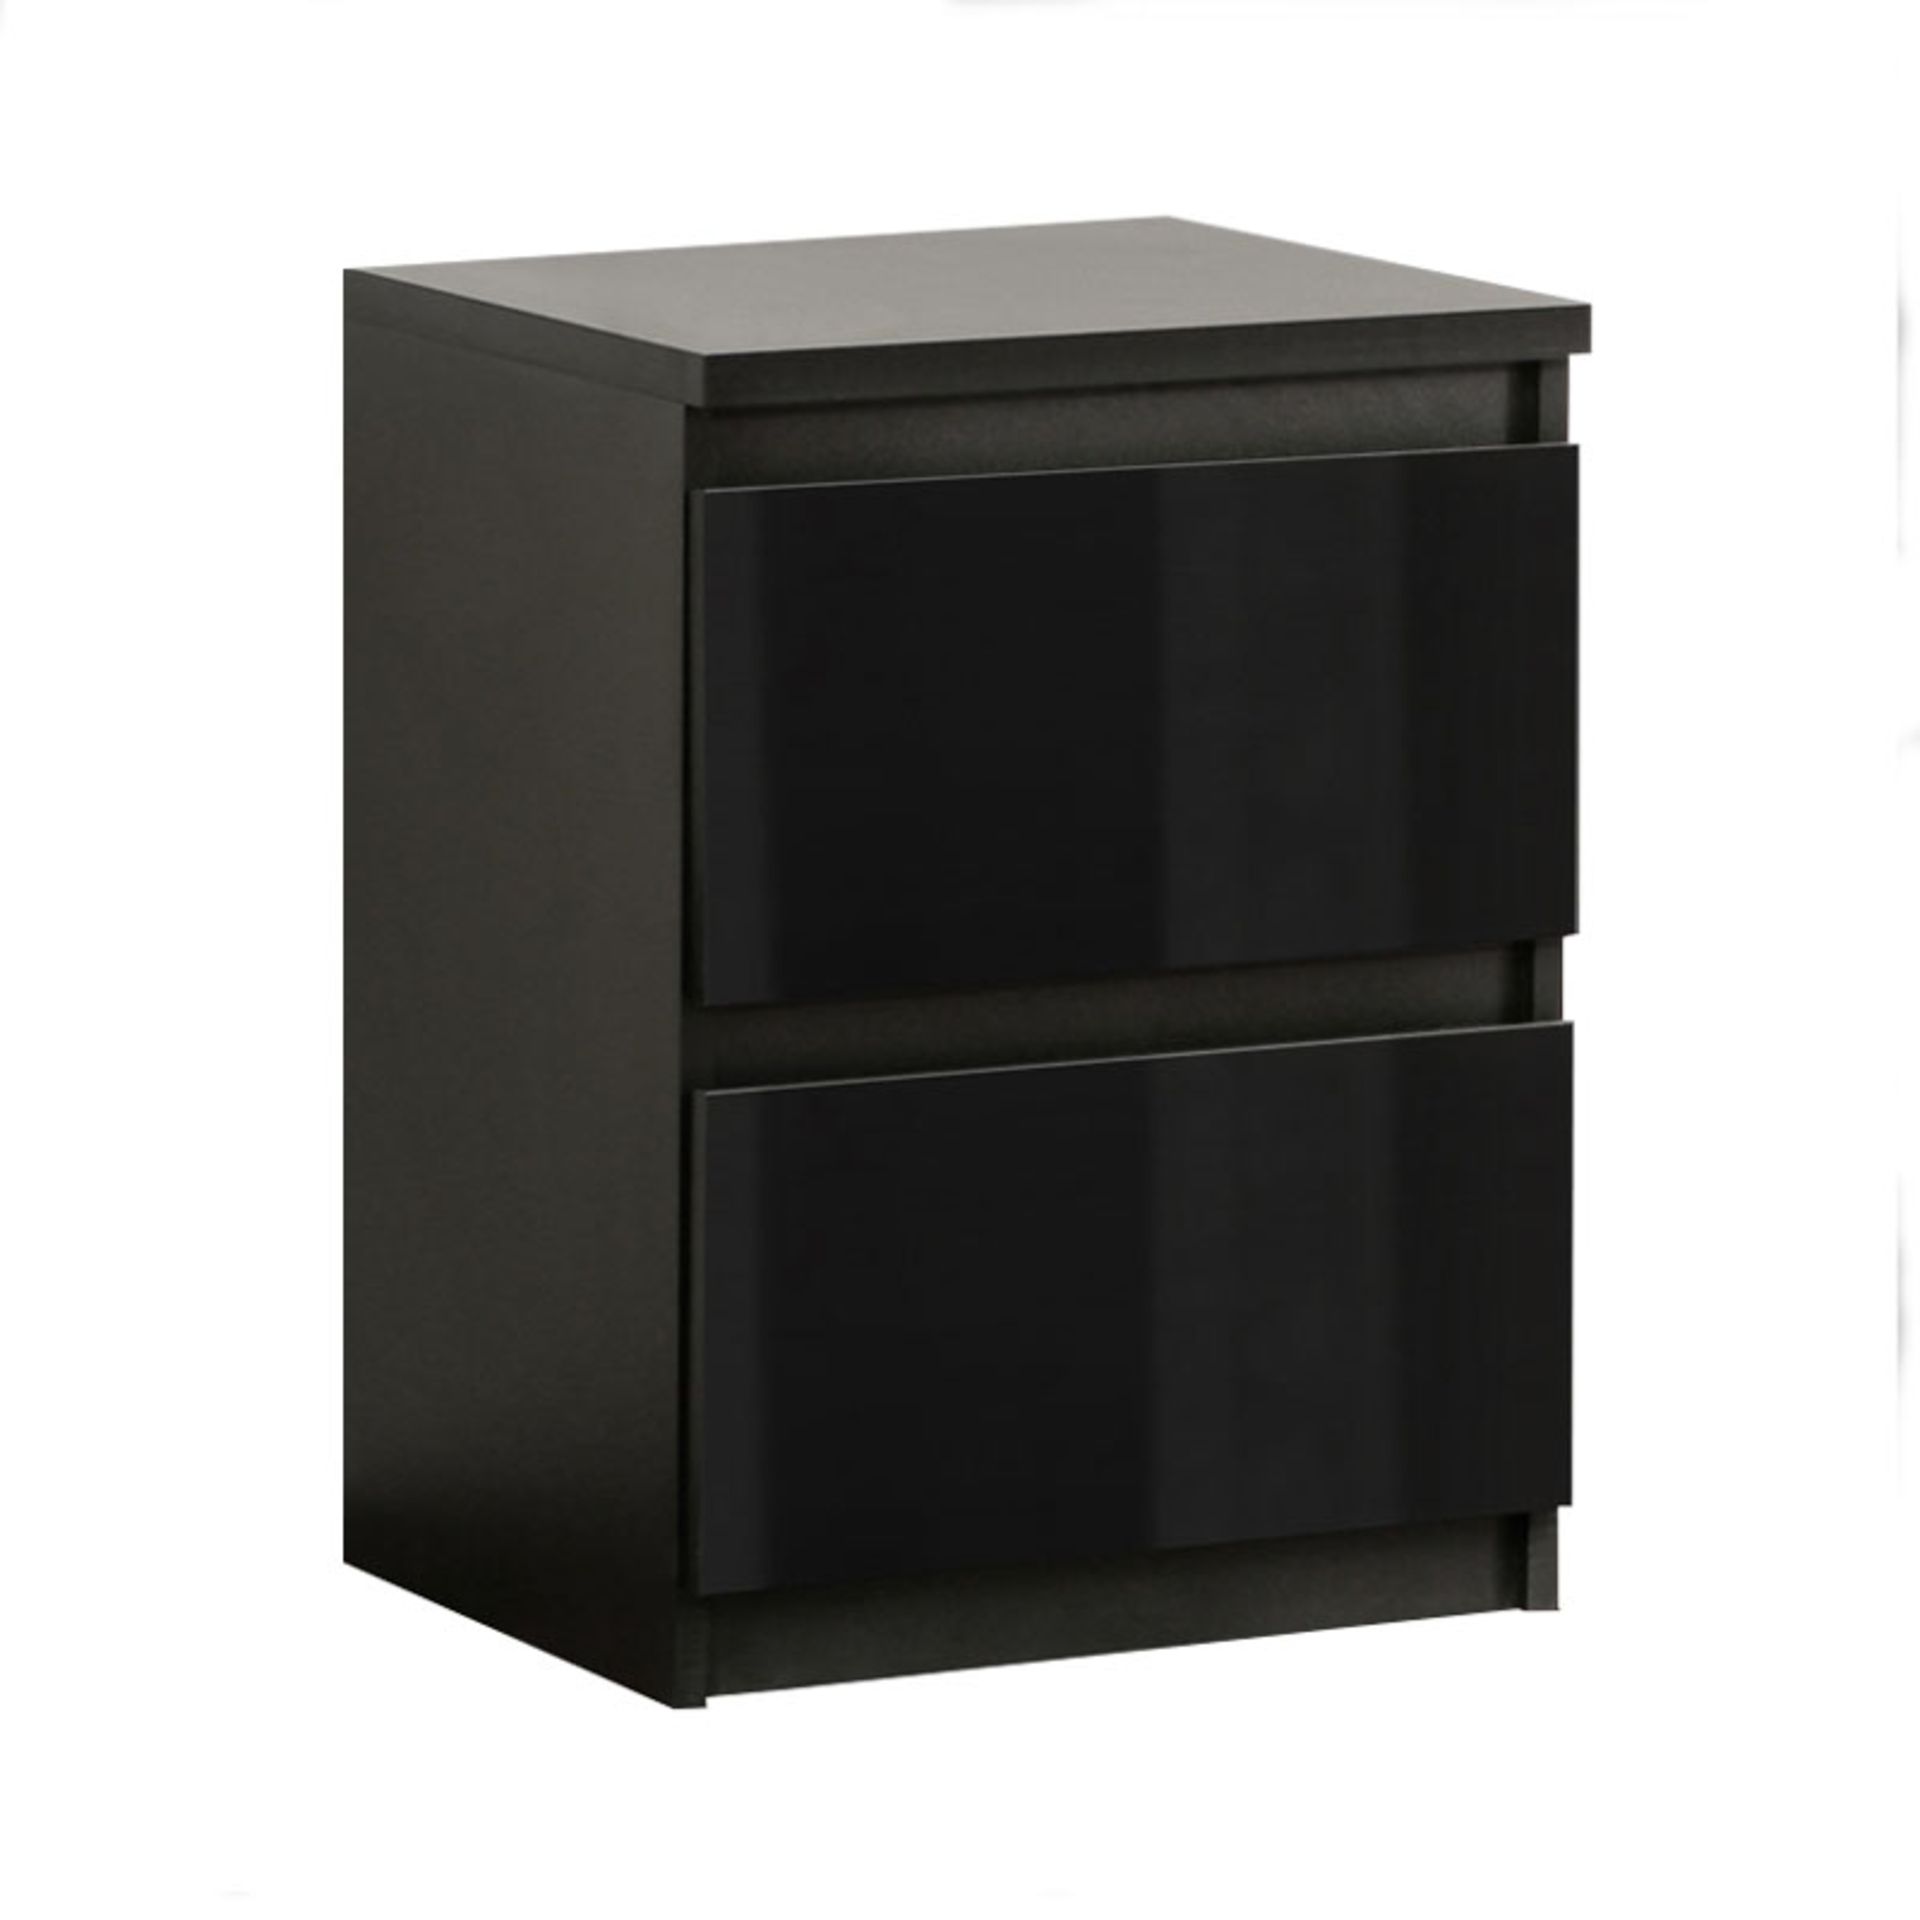 1 BRAND NEW BOXED CHELSEA BLACK GLOSS BEDSIDE CABI